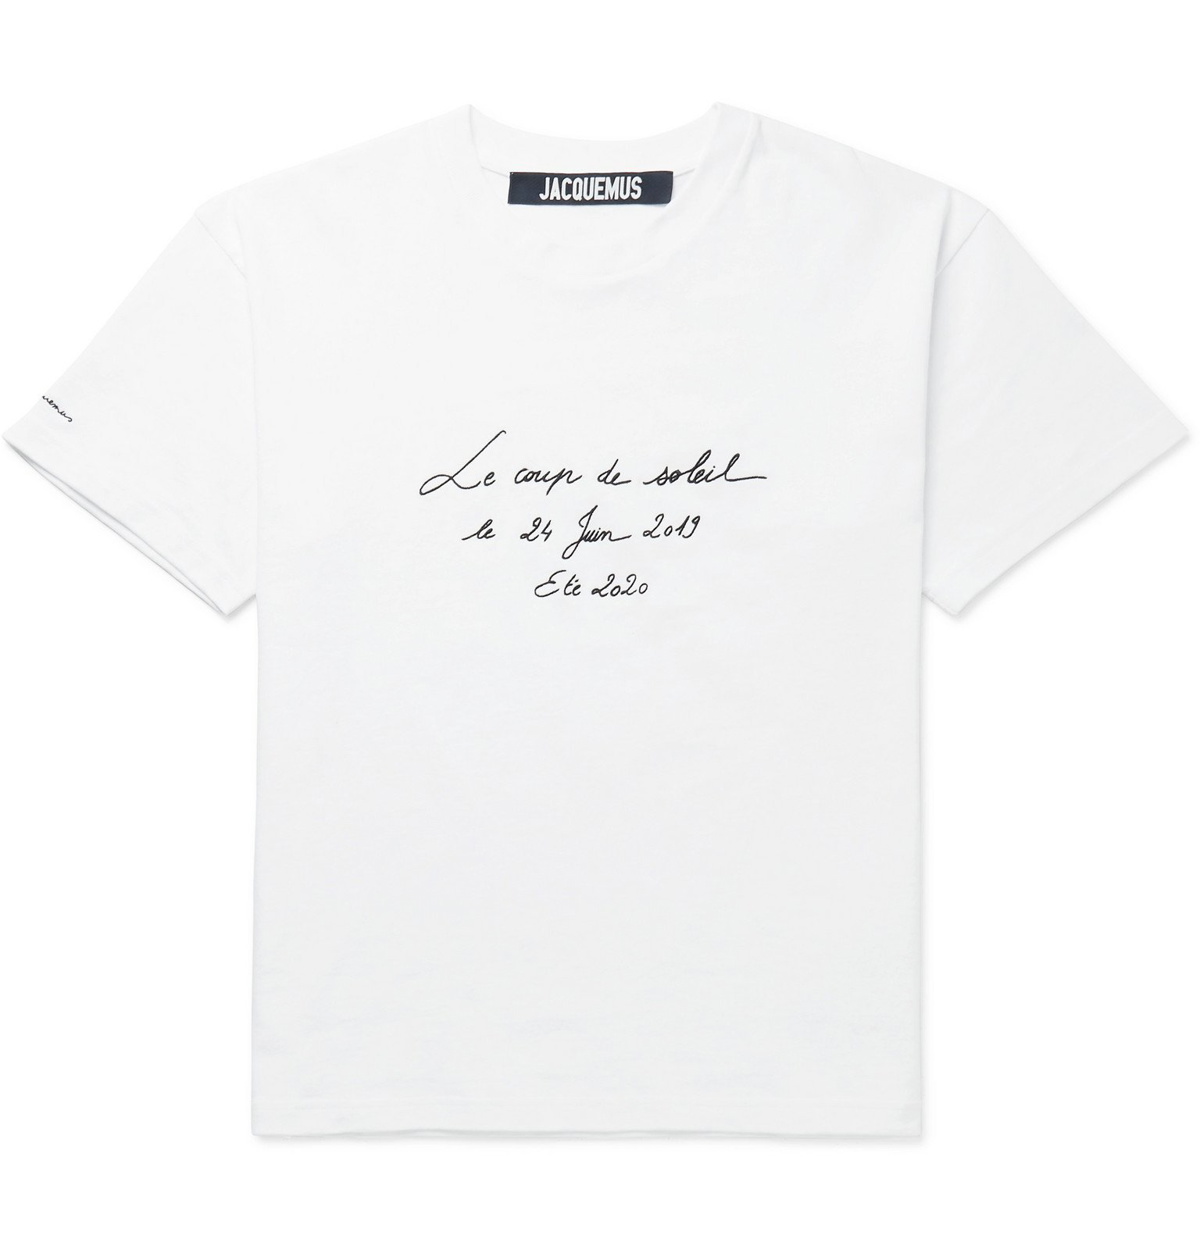 Jacquemus - Embroidered Cotton-Jersey T-Shirt - White Jacquemus